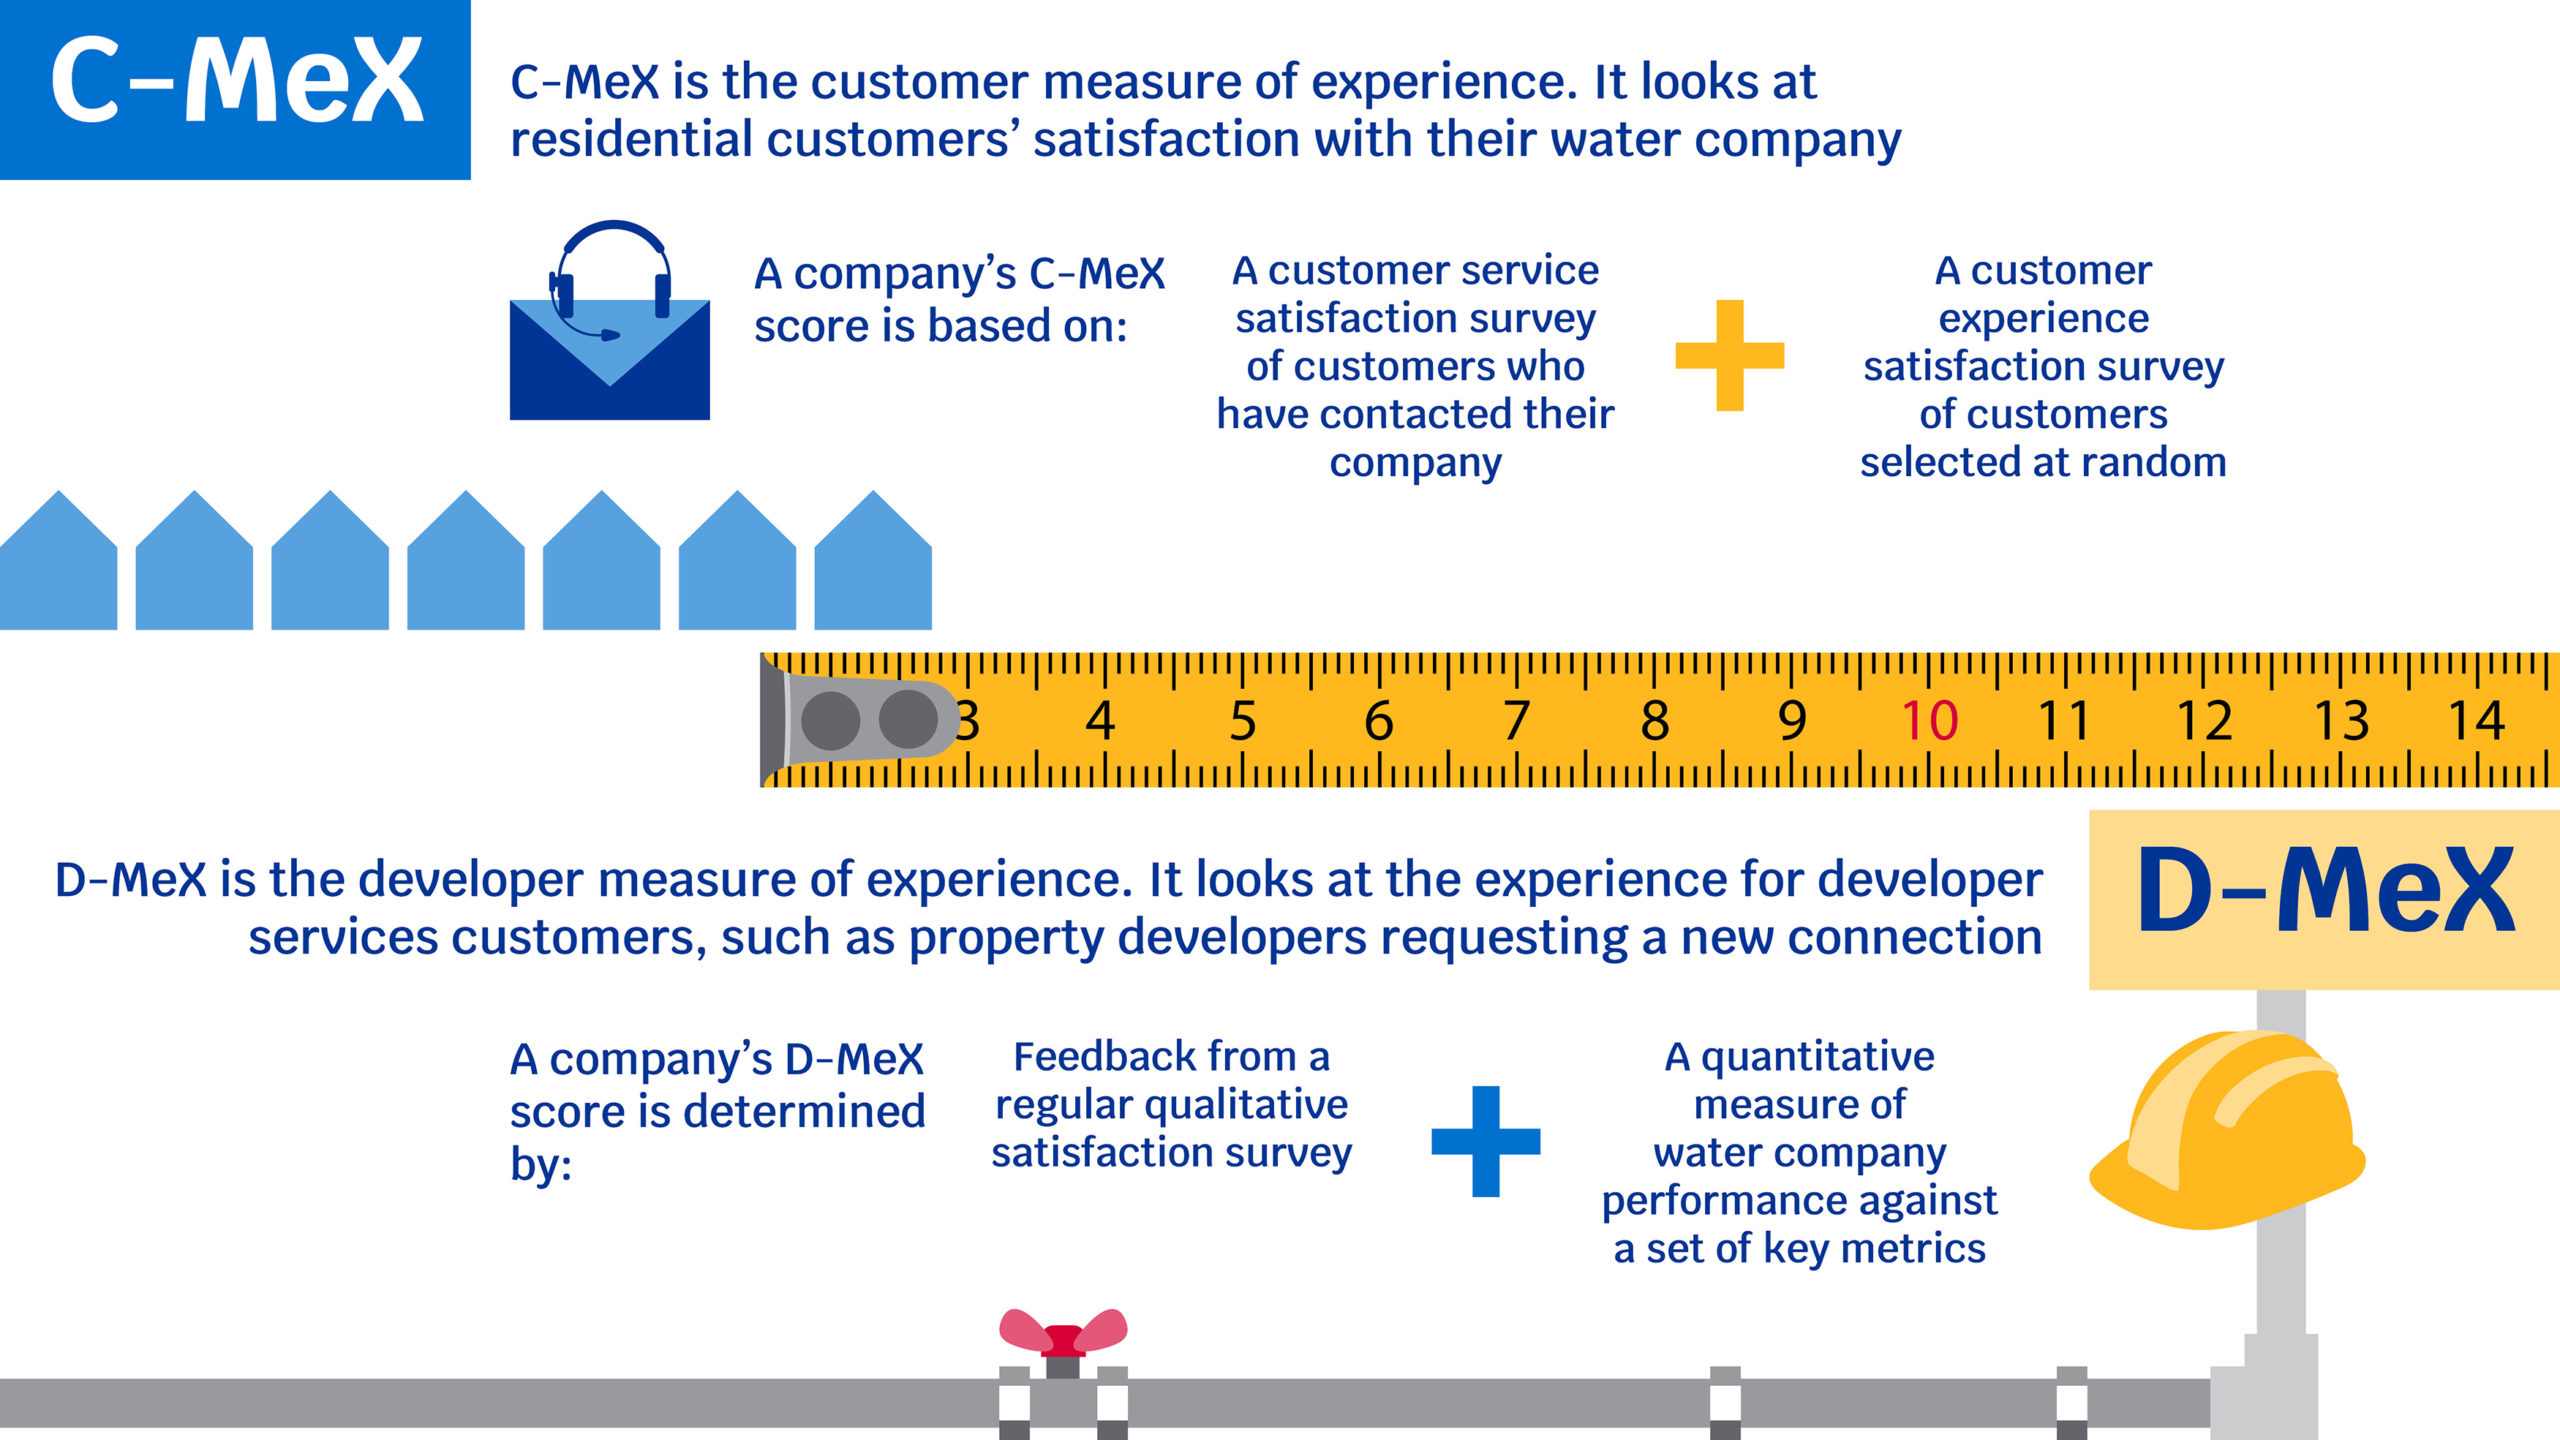 CMeX DMeX infographic explanation - C-MeX is the customer measure of experience. It looks at residential customers' satisfaction with their water company. D-MeX is the developer measure of experience. It looks at the experience for developer services customers, such as property developers requesting a new connection.